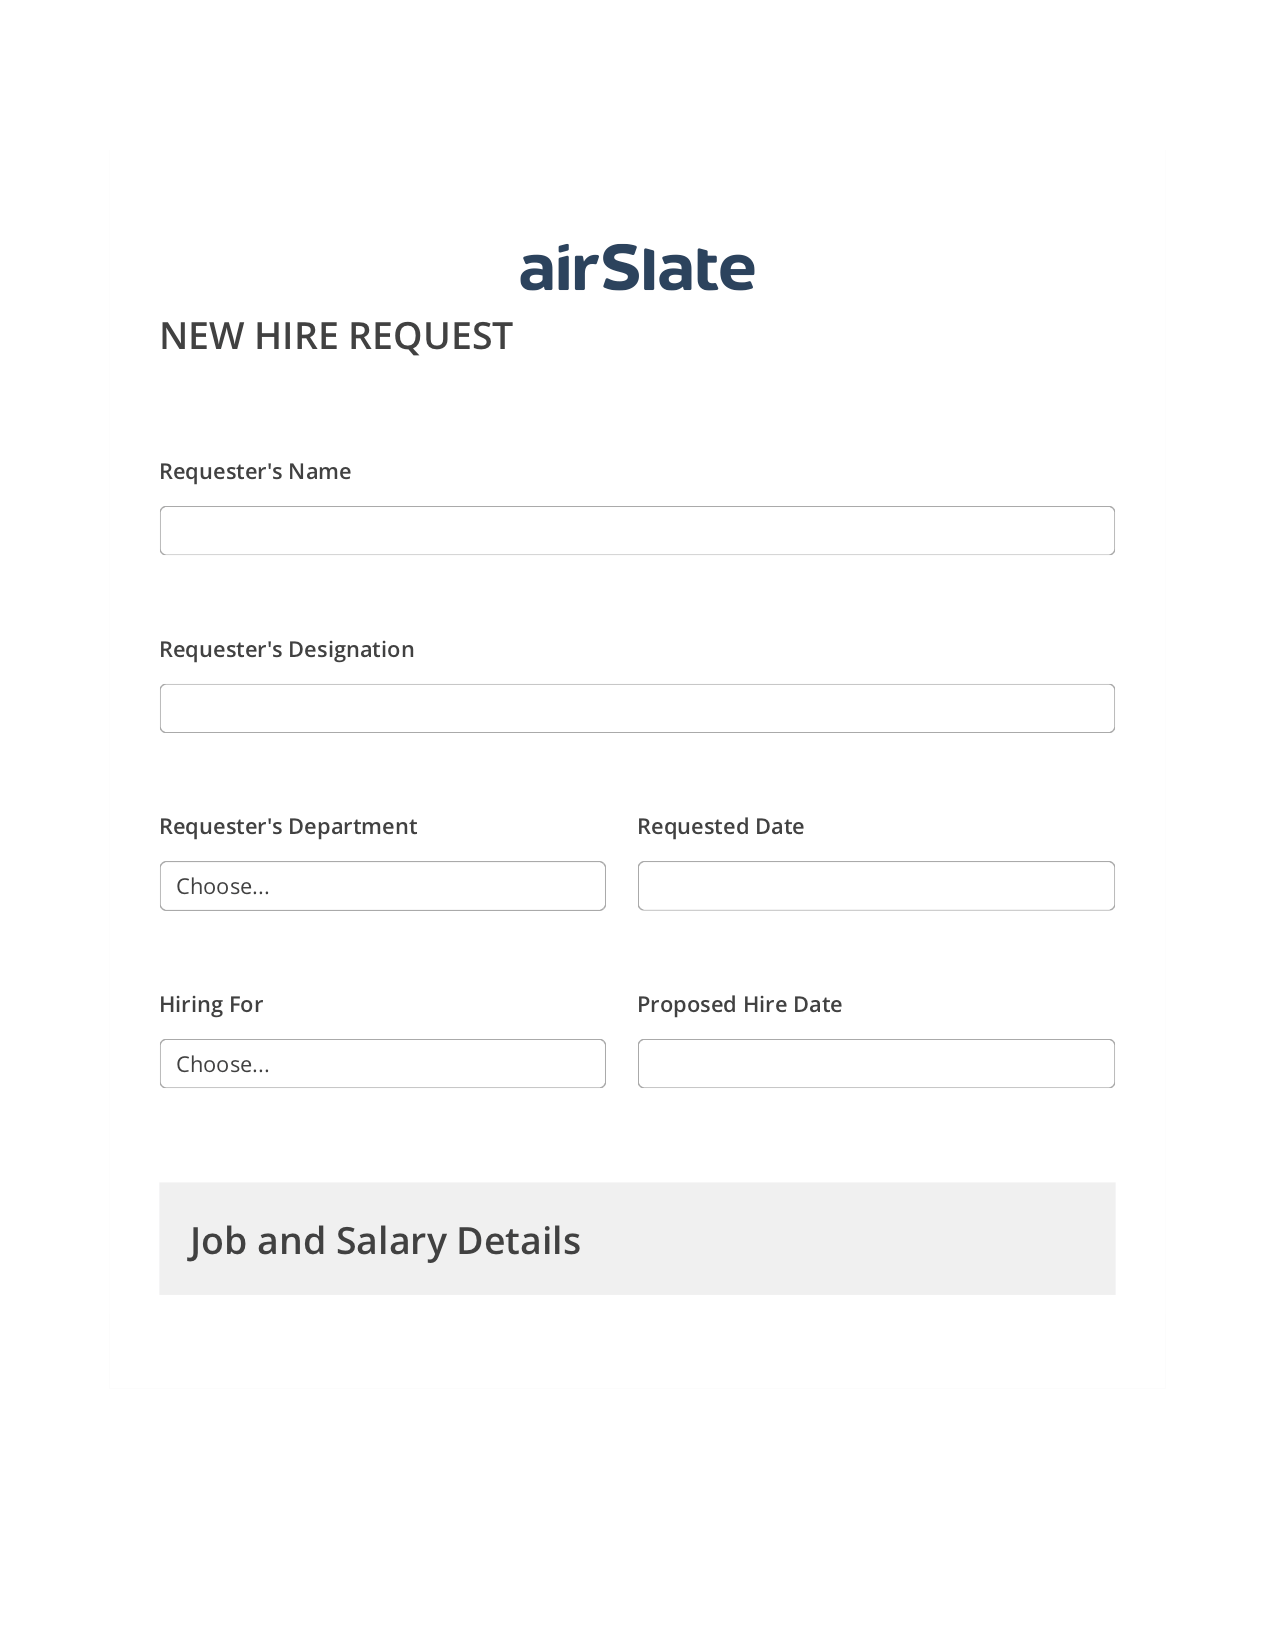 Hiring Request Workflow Pre-fill from Excel Spreadsheet Bot, Create slate from another Flow Bot, Archive to Box Bot